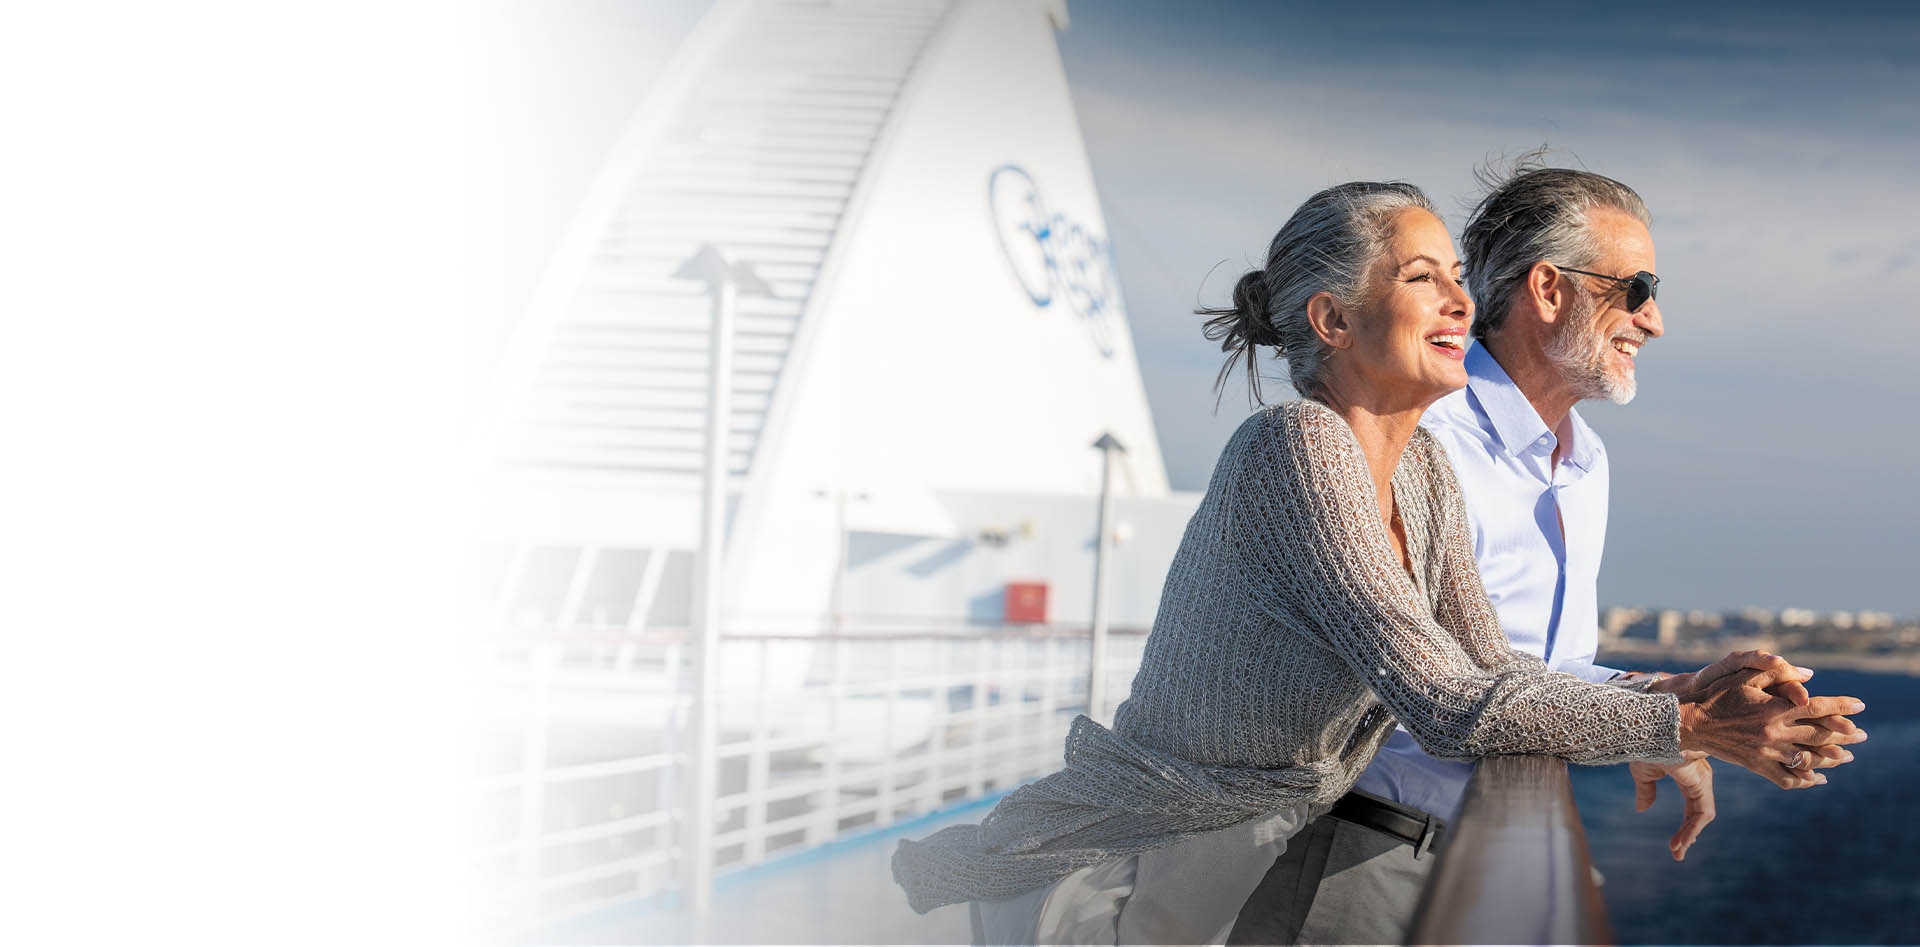 Book Now For The Best Cruise Fares